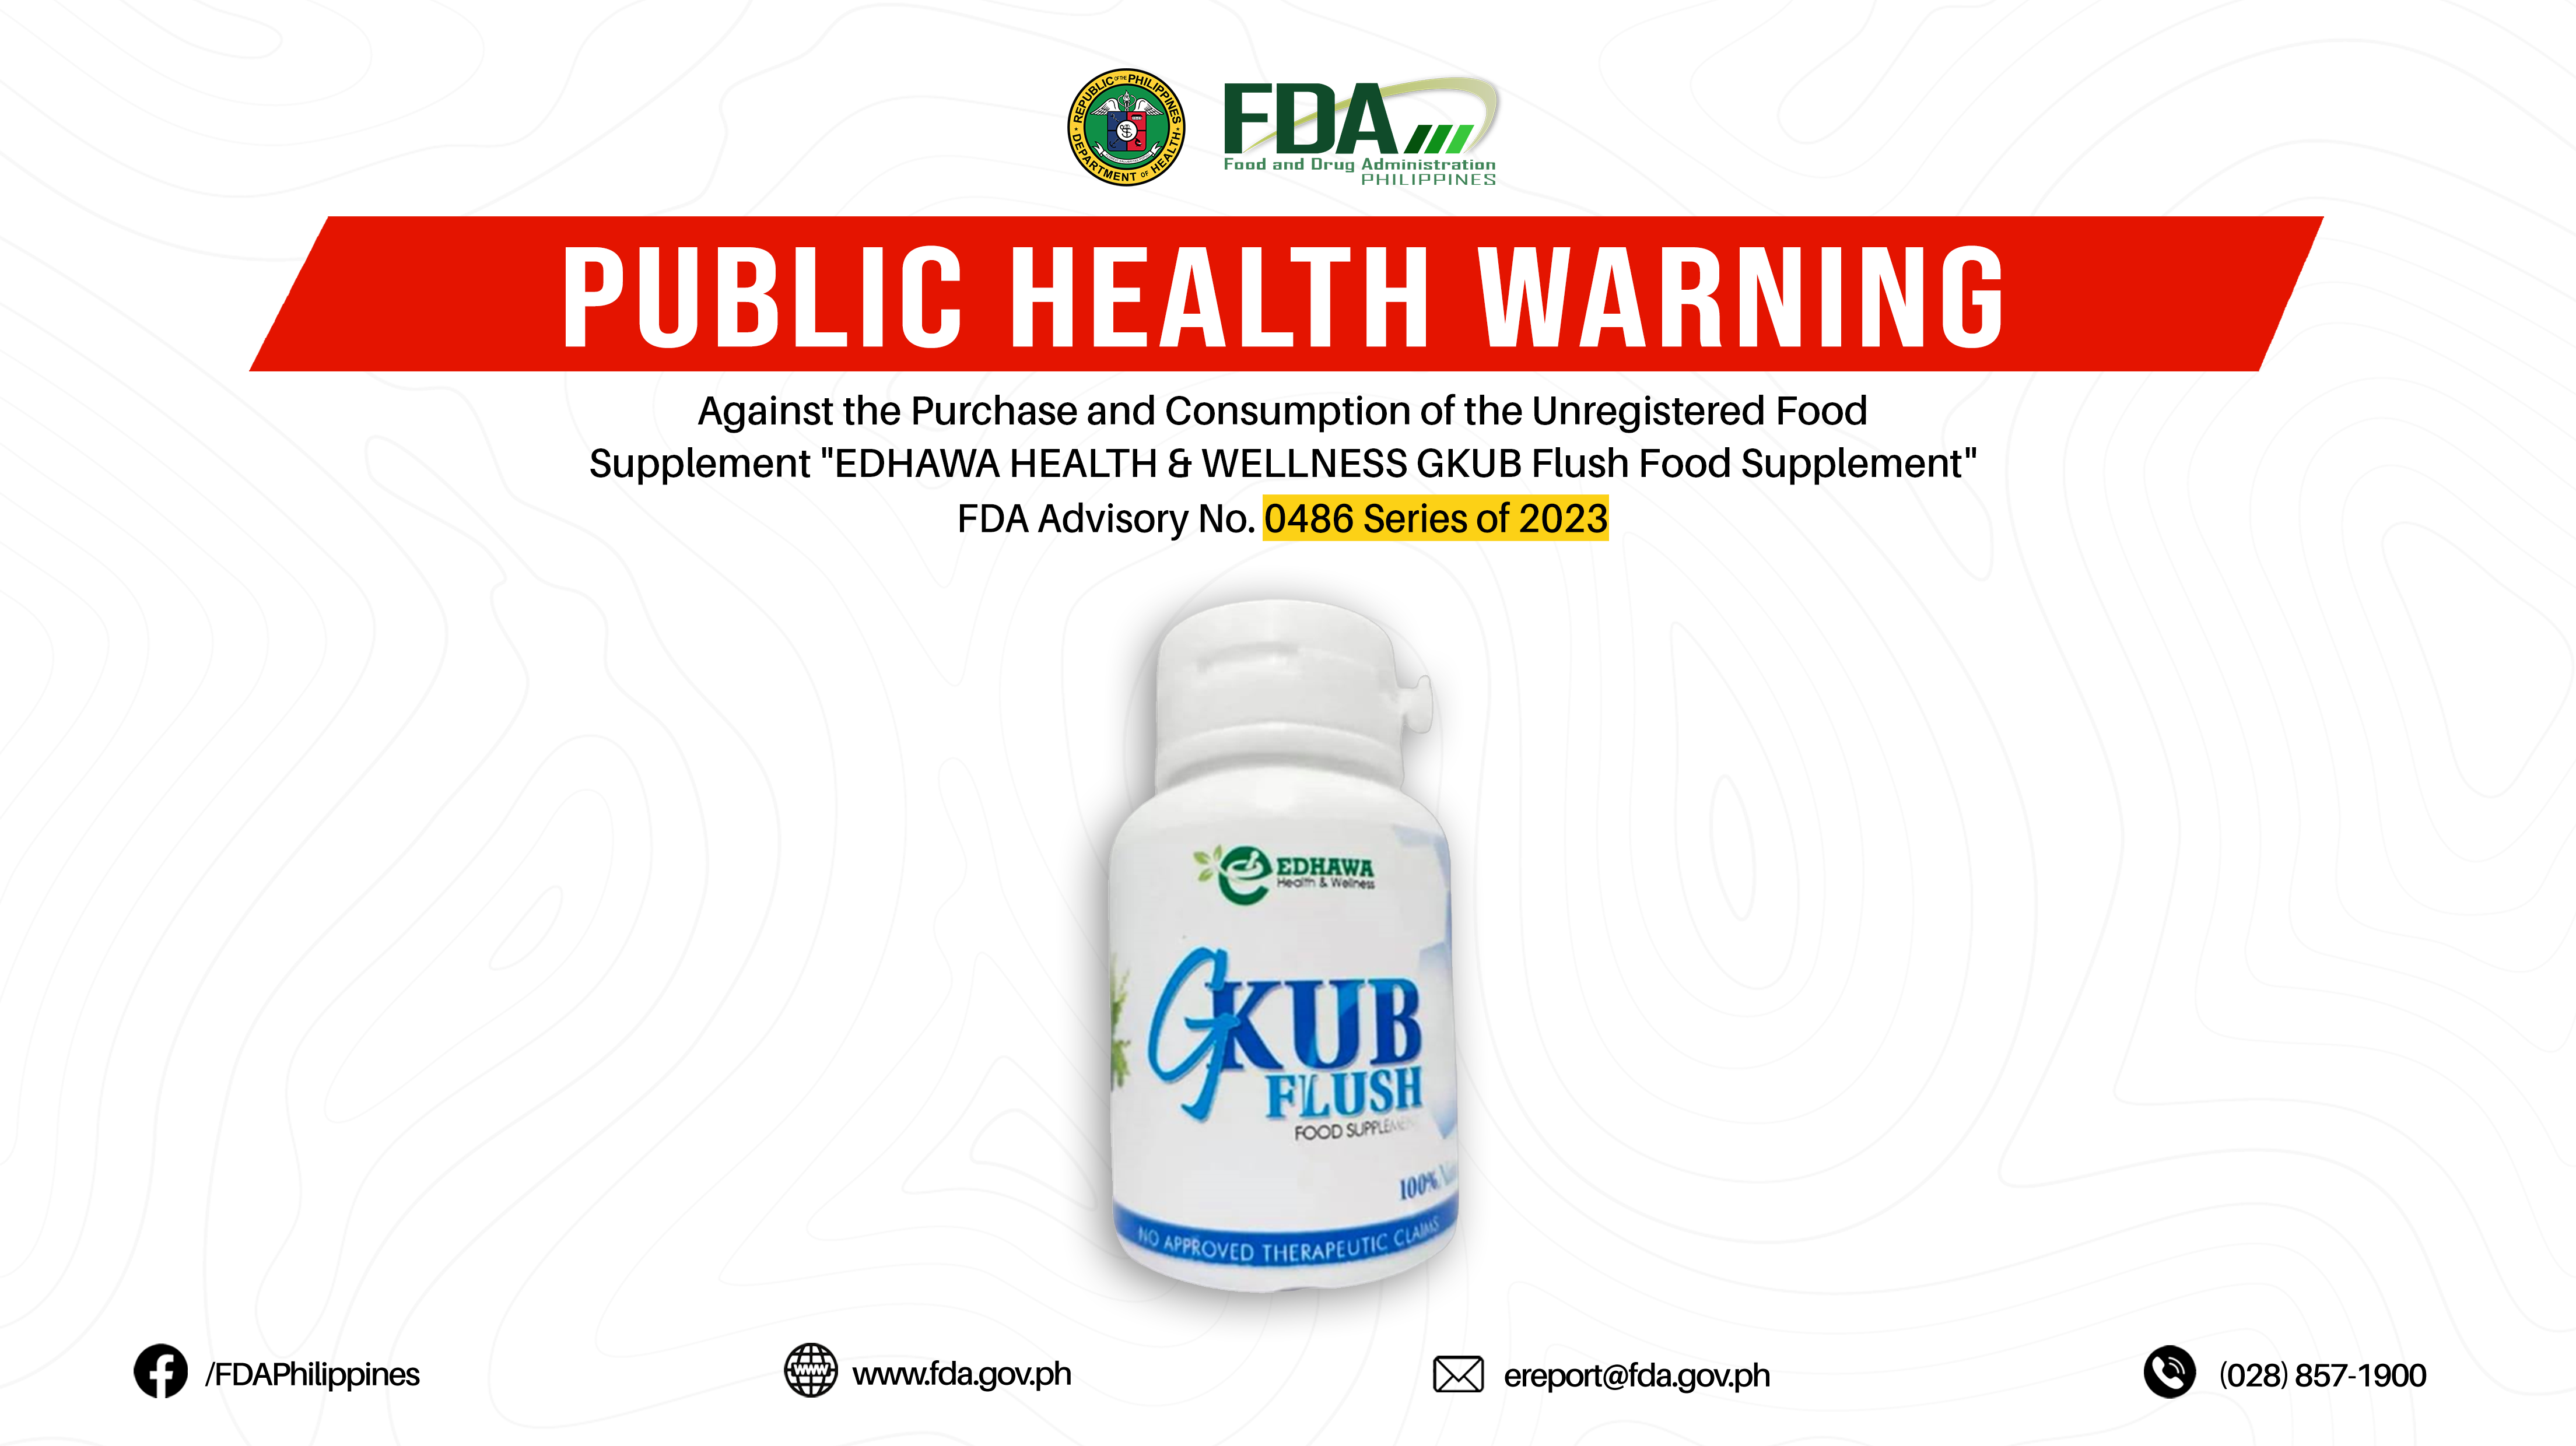 FDA Advisory No.2023-0486 || Public Health Warning Against the Purchase and Consumption of the Unregistered Food Supplement “EDHAWA HEALTH & WELLNESS GKUB Flush Food Supplement”